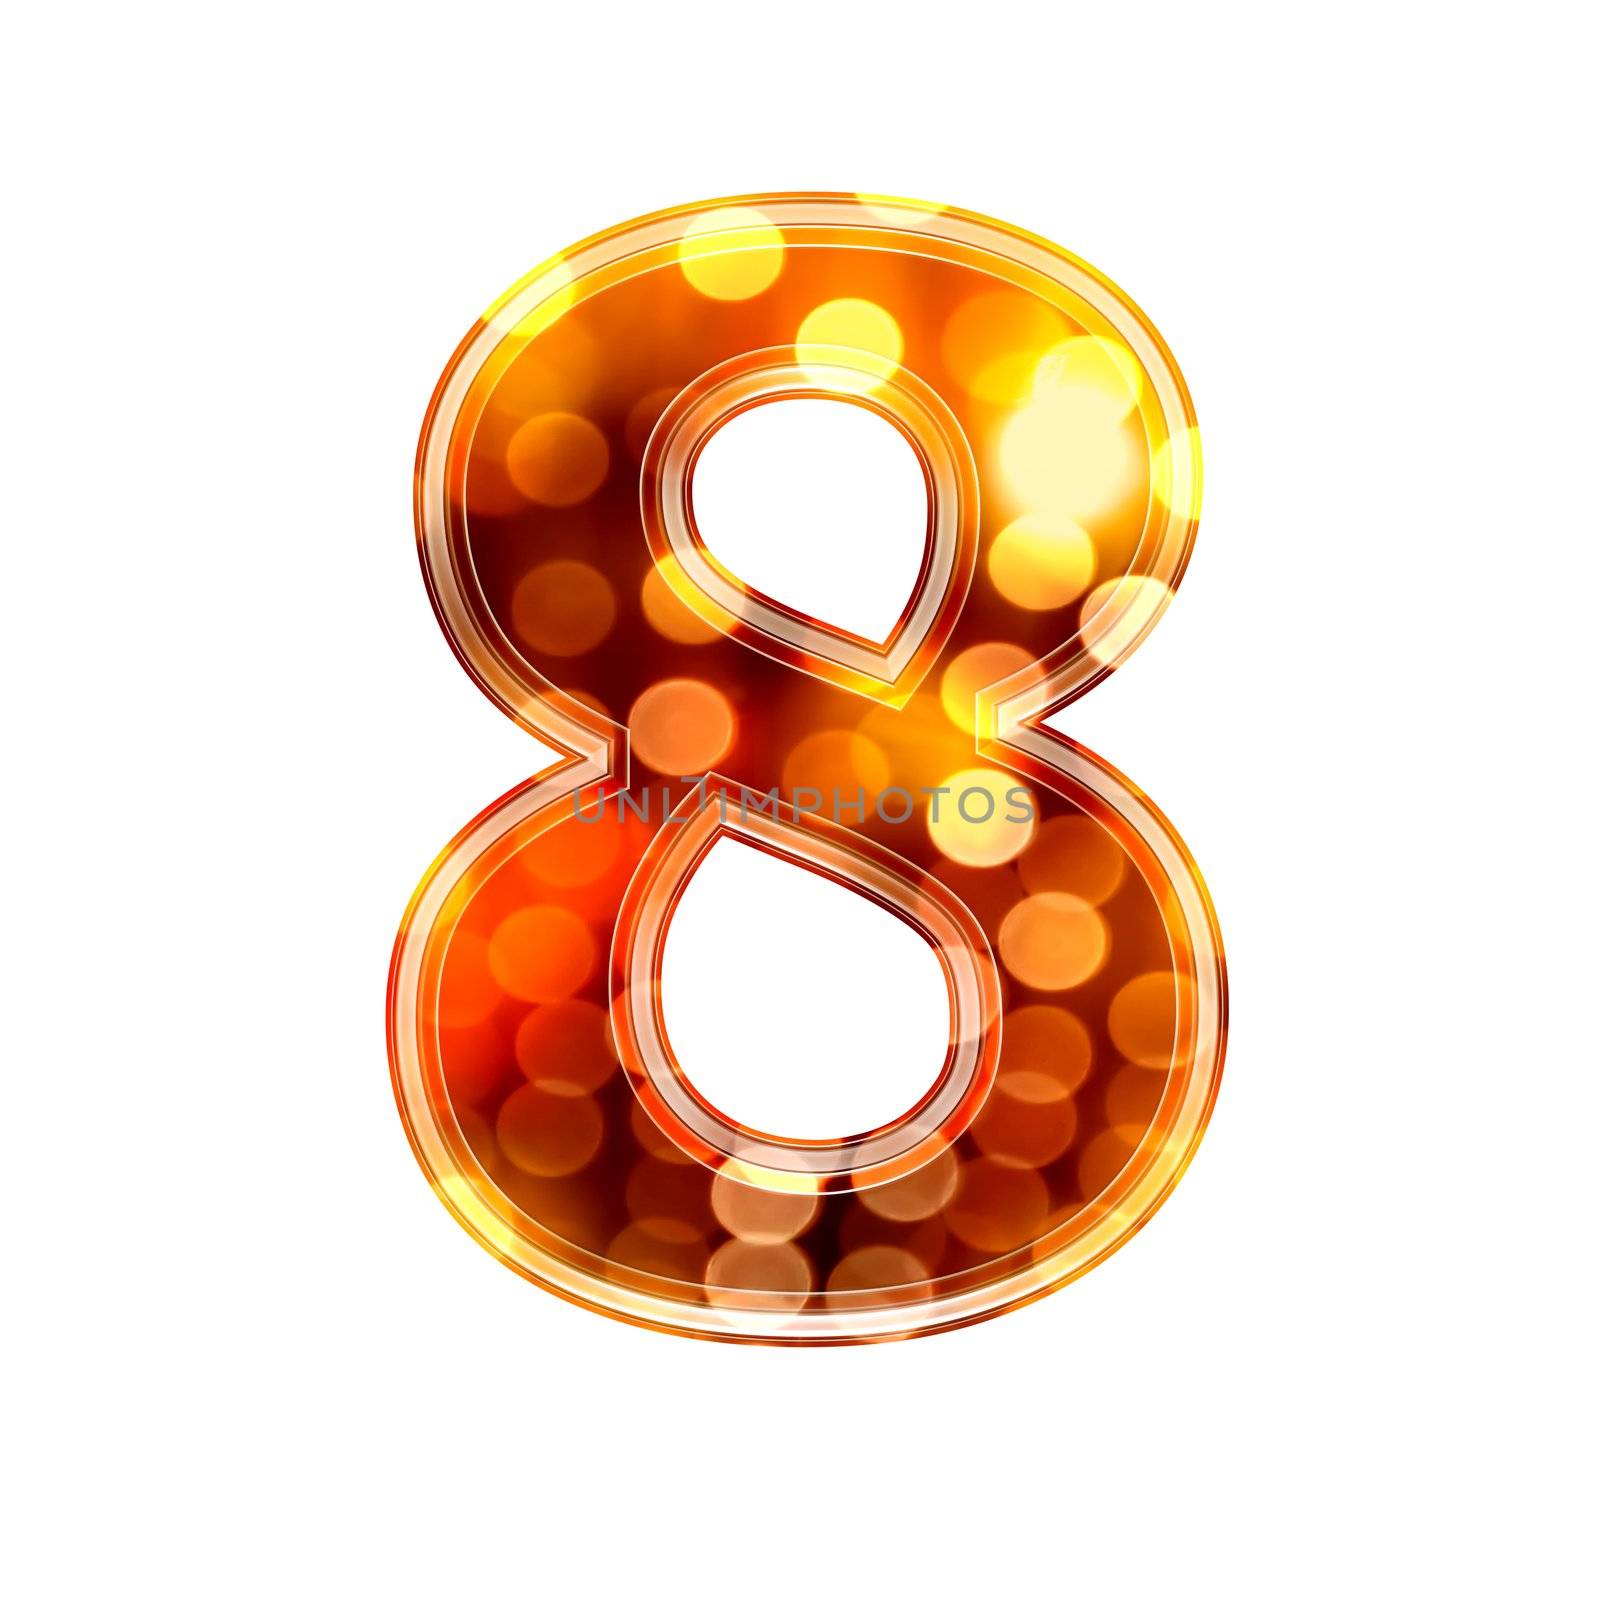 3d digit with glowing lights texture - 8 by chrisroll